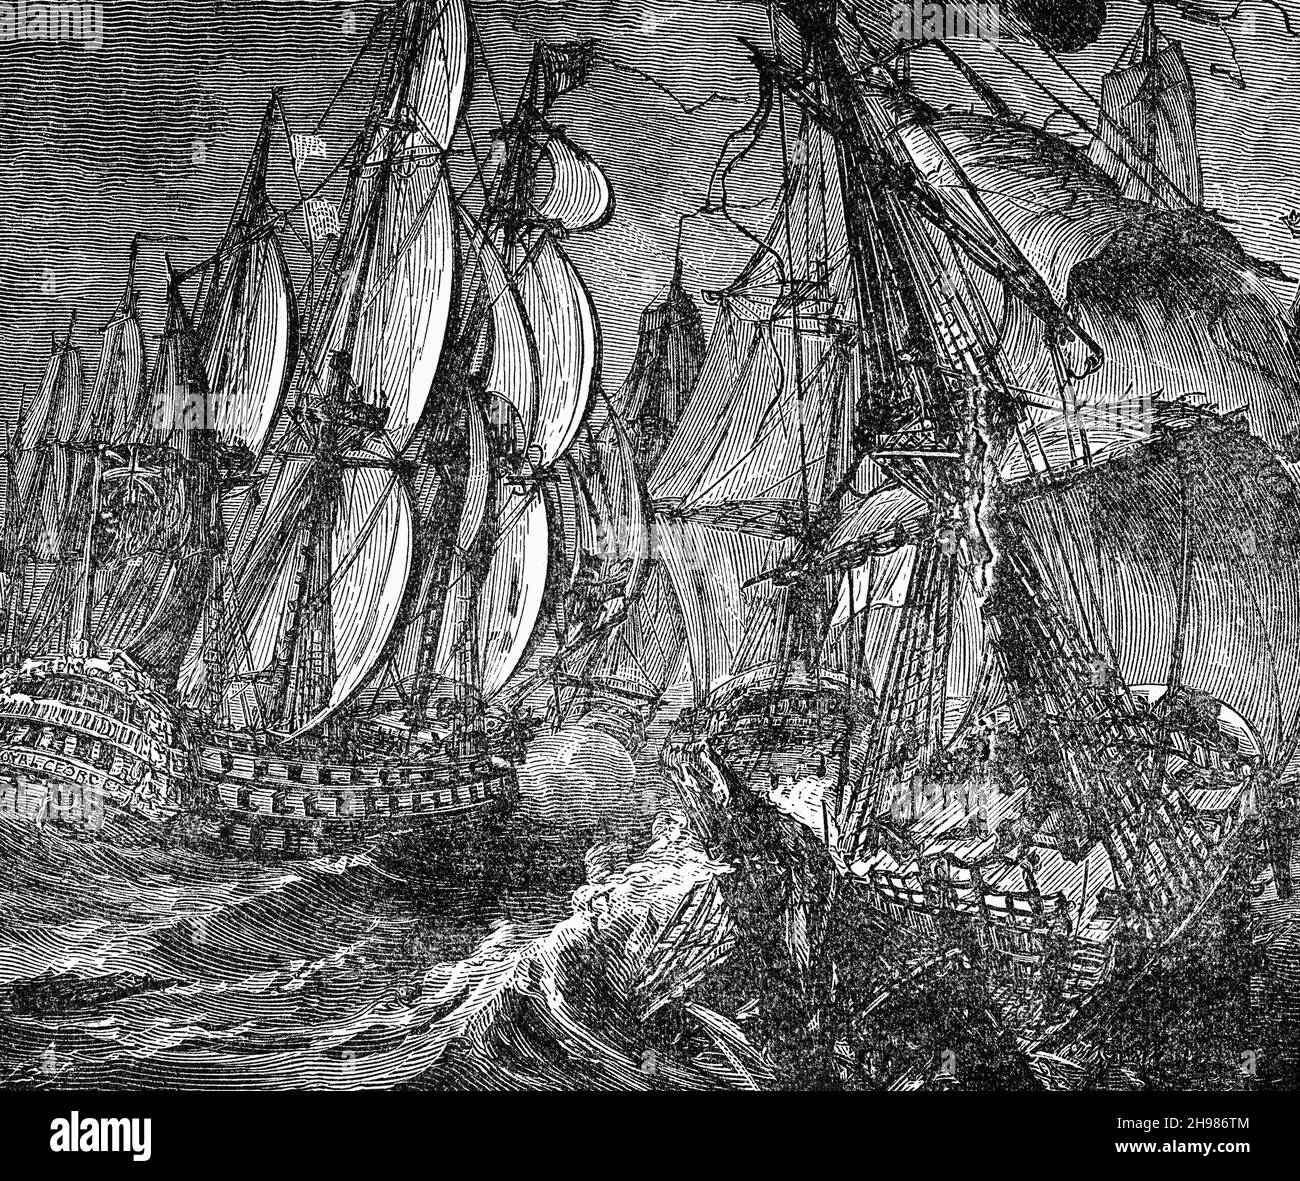 A late 19th Century illustration of the Battle of Cape St. Vincent, a naval battle that took place off the southern coast of Portugal on 16 January 1780 during the American Revolutionary War. A British fleet under Admiral Sir George Rodney defeated a Spanish squadron under Don Juan de Lángara. The battle is sometimes referred to as the Moonlight Battle because it was unusual for naval battles in the Age of Sail to take place at night. It was also the first major naval victory for the British over their European enemies in the war and proved the value of copper-sheathing the hulls of warships. Stock Photo